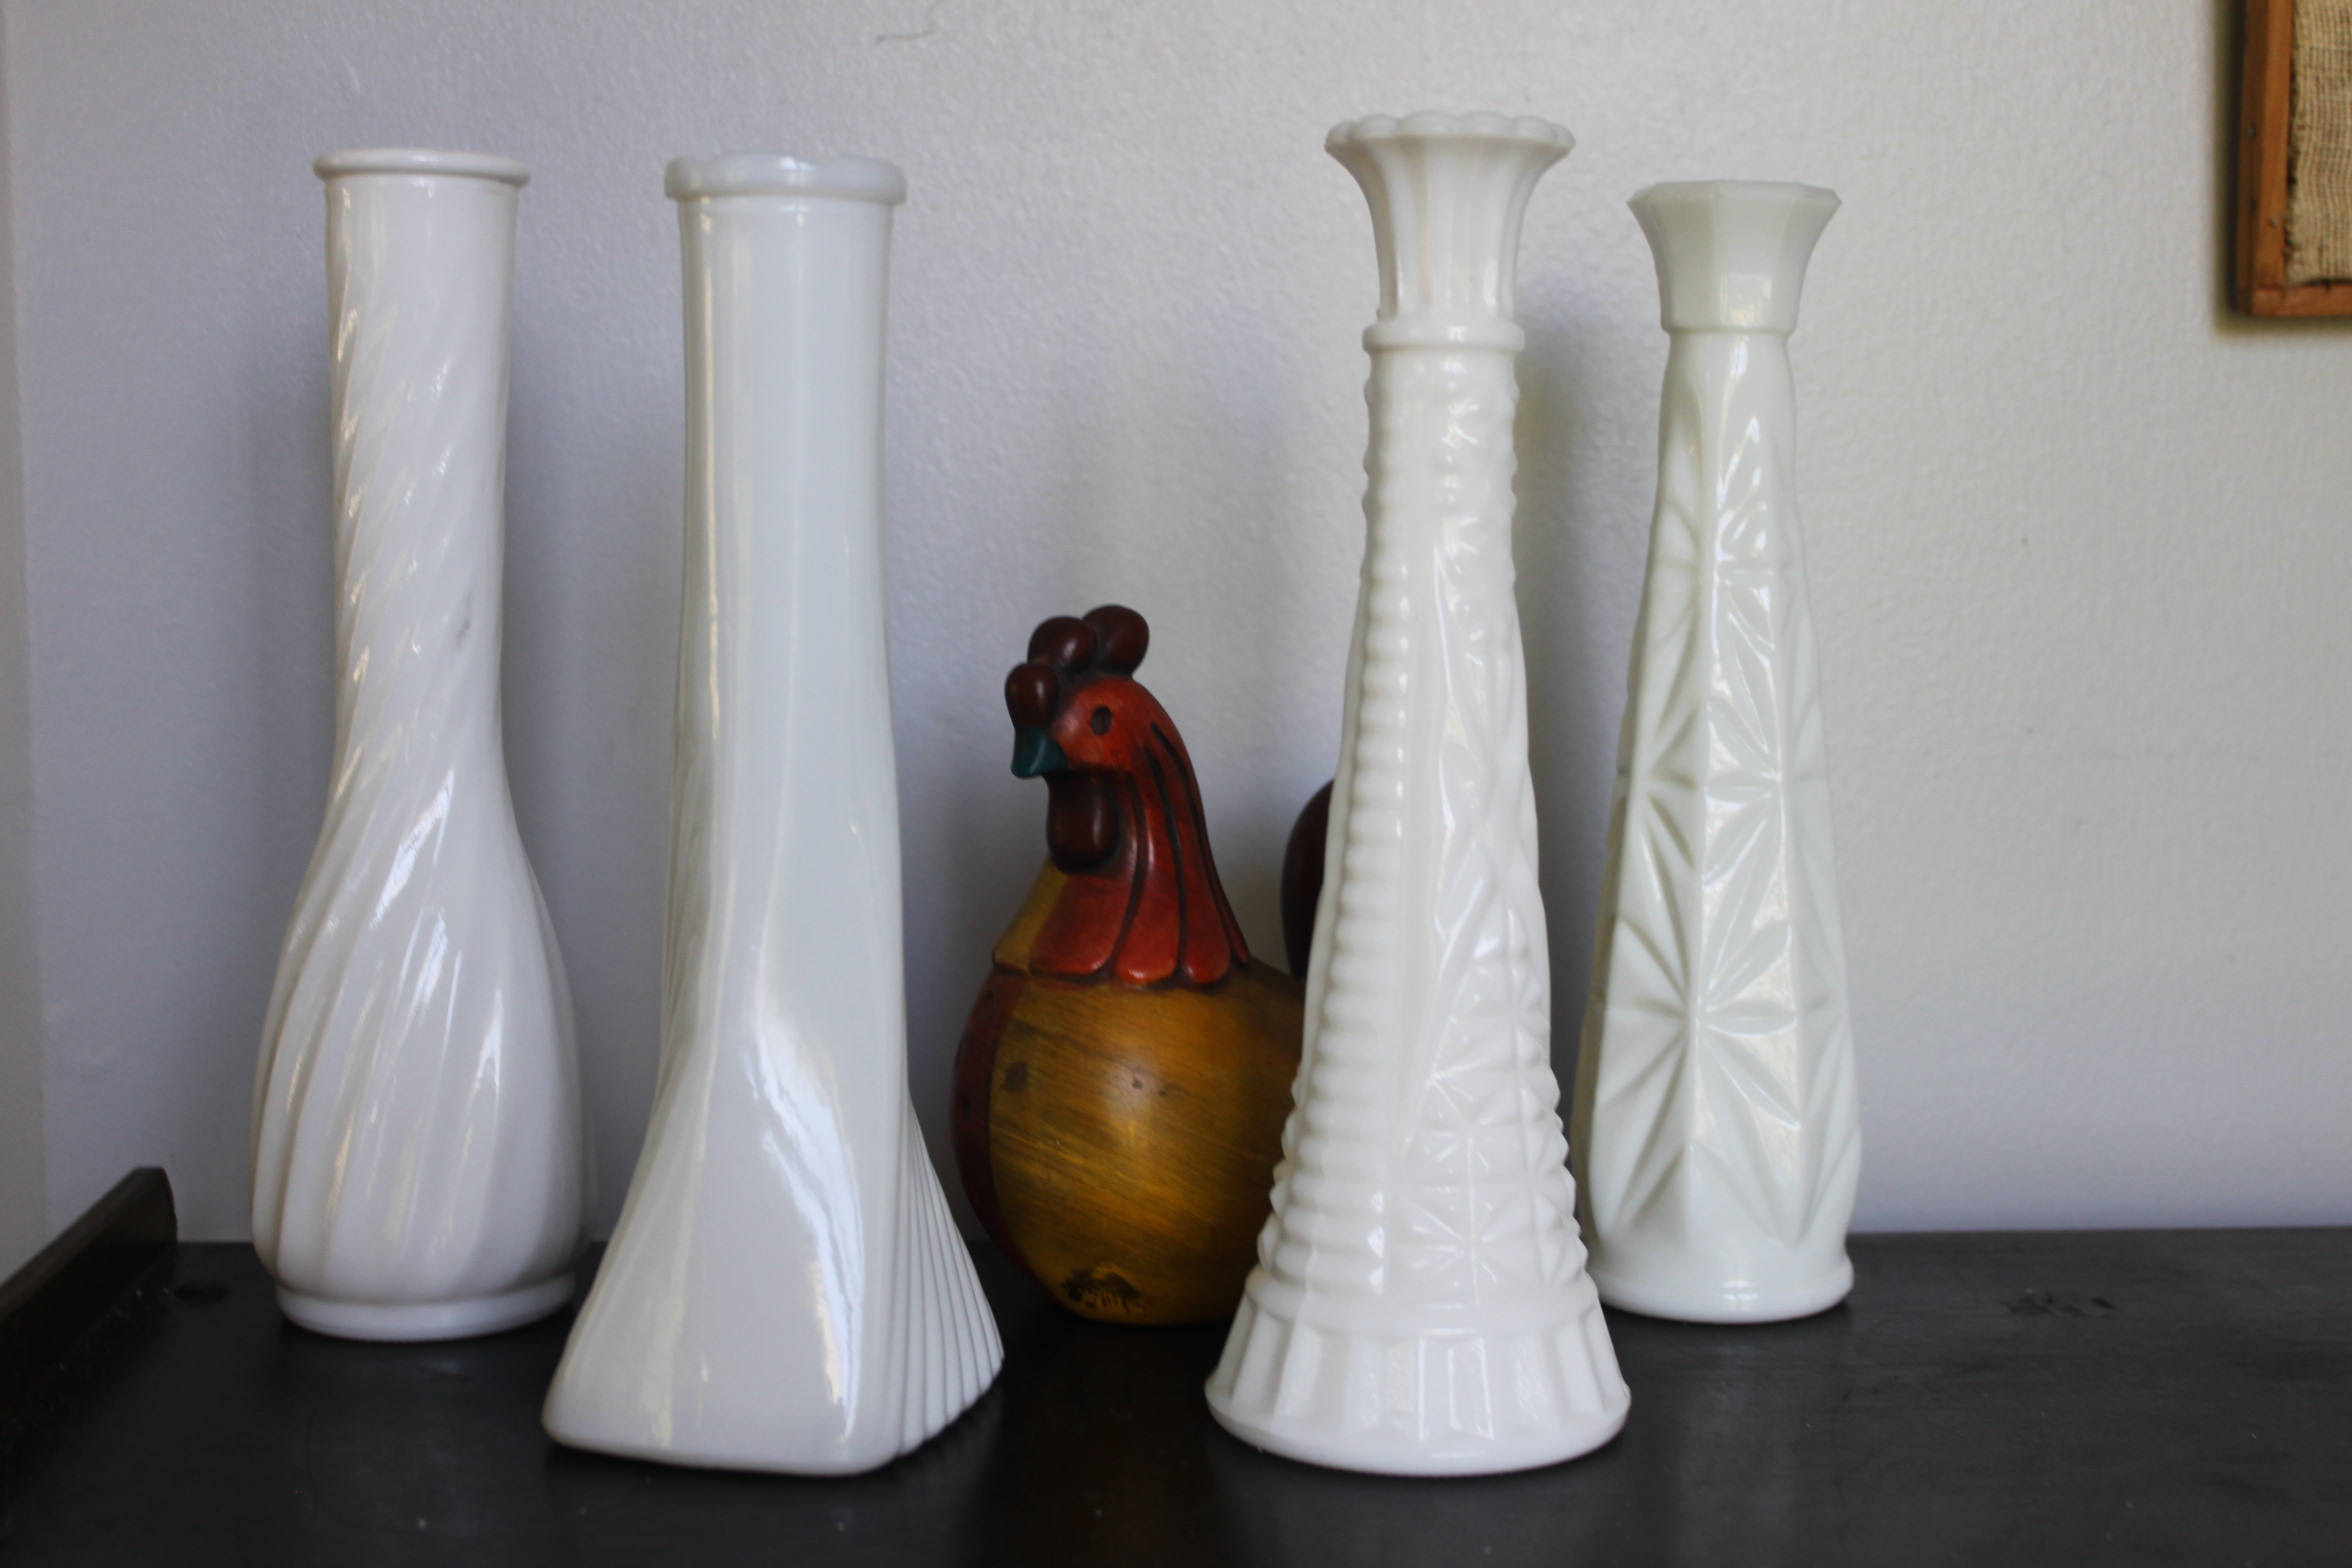 15 Stylish Antique Milk Glass Vases 2023 free download antique milk glass vases of sleek set of 4 different styles set of beautiful milkglass throughout description set of 4 unique milk glass vases